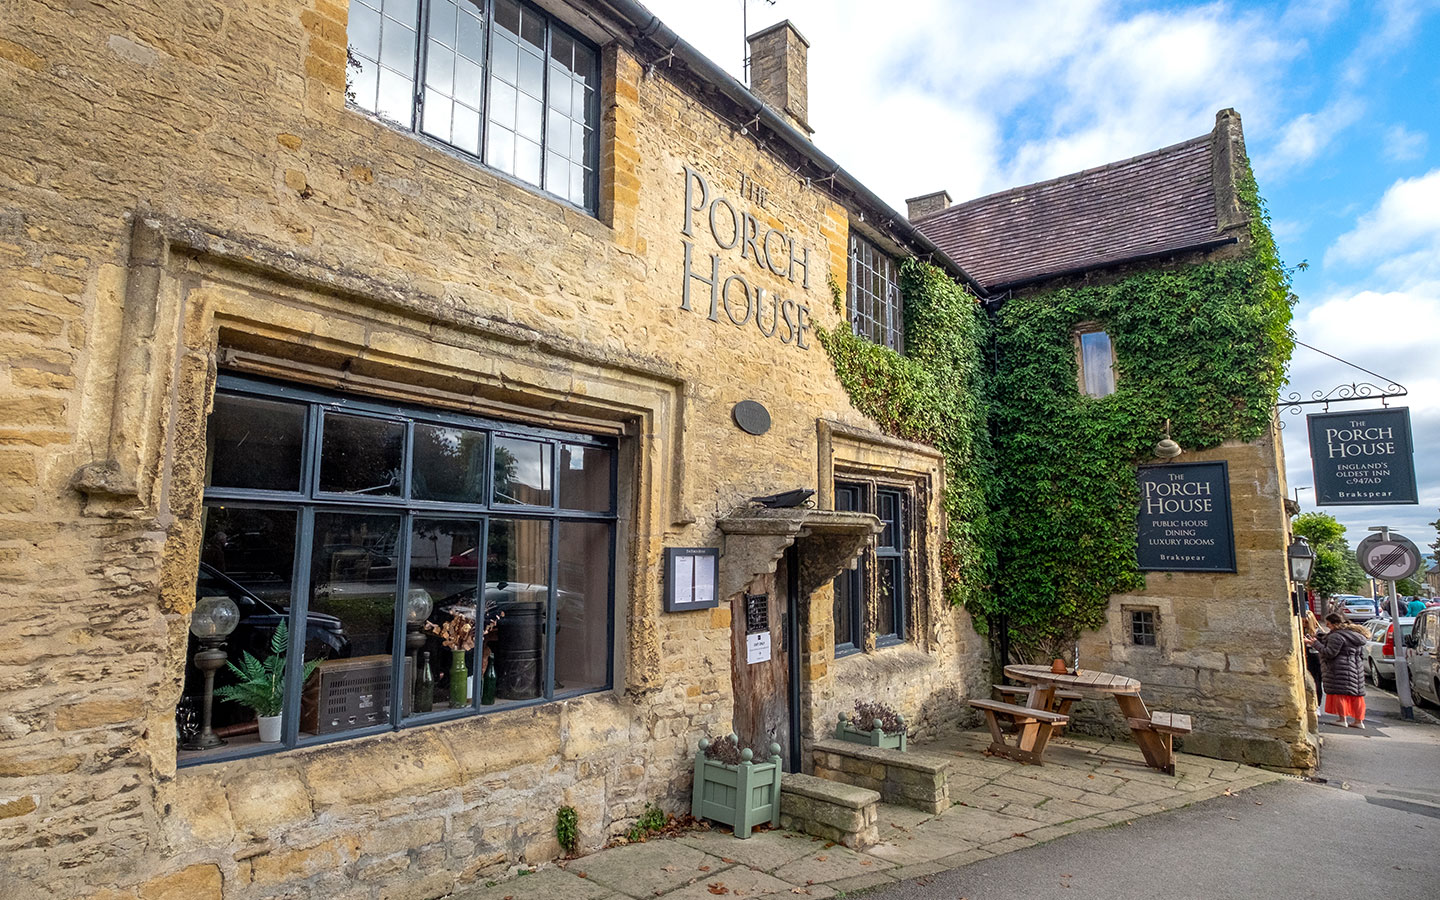 The Porch House pub in Stow-on-the-Wold